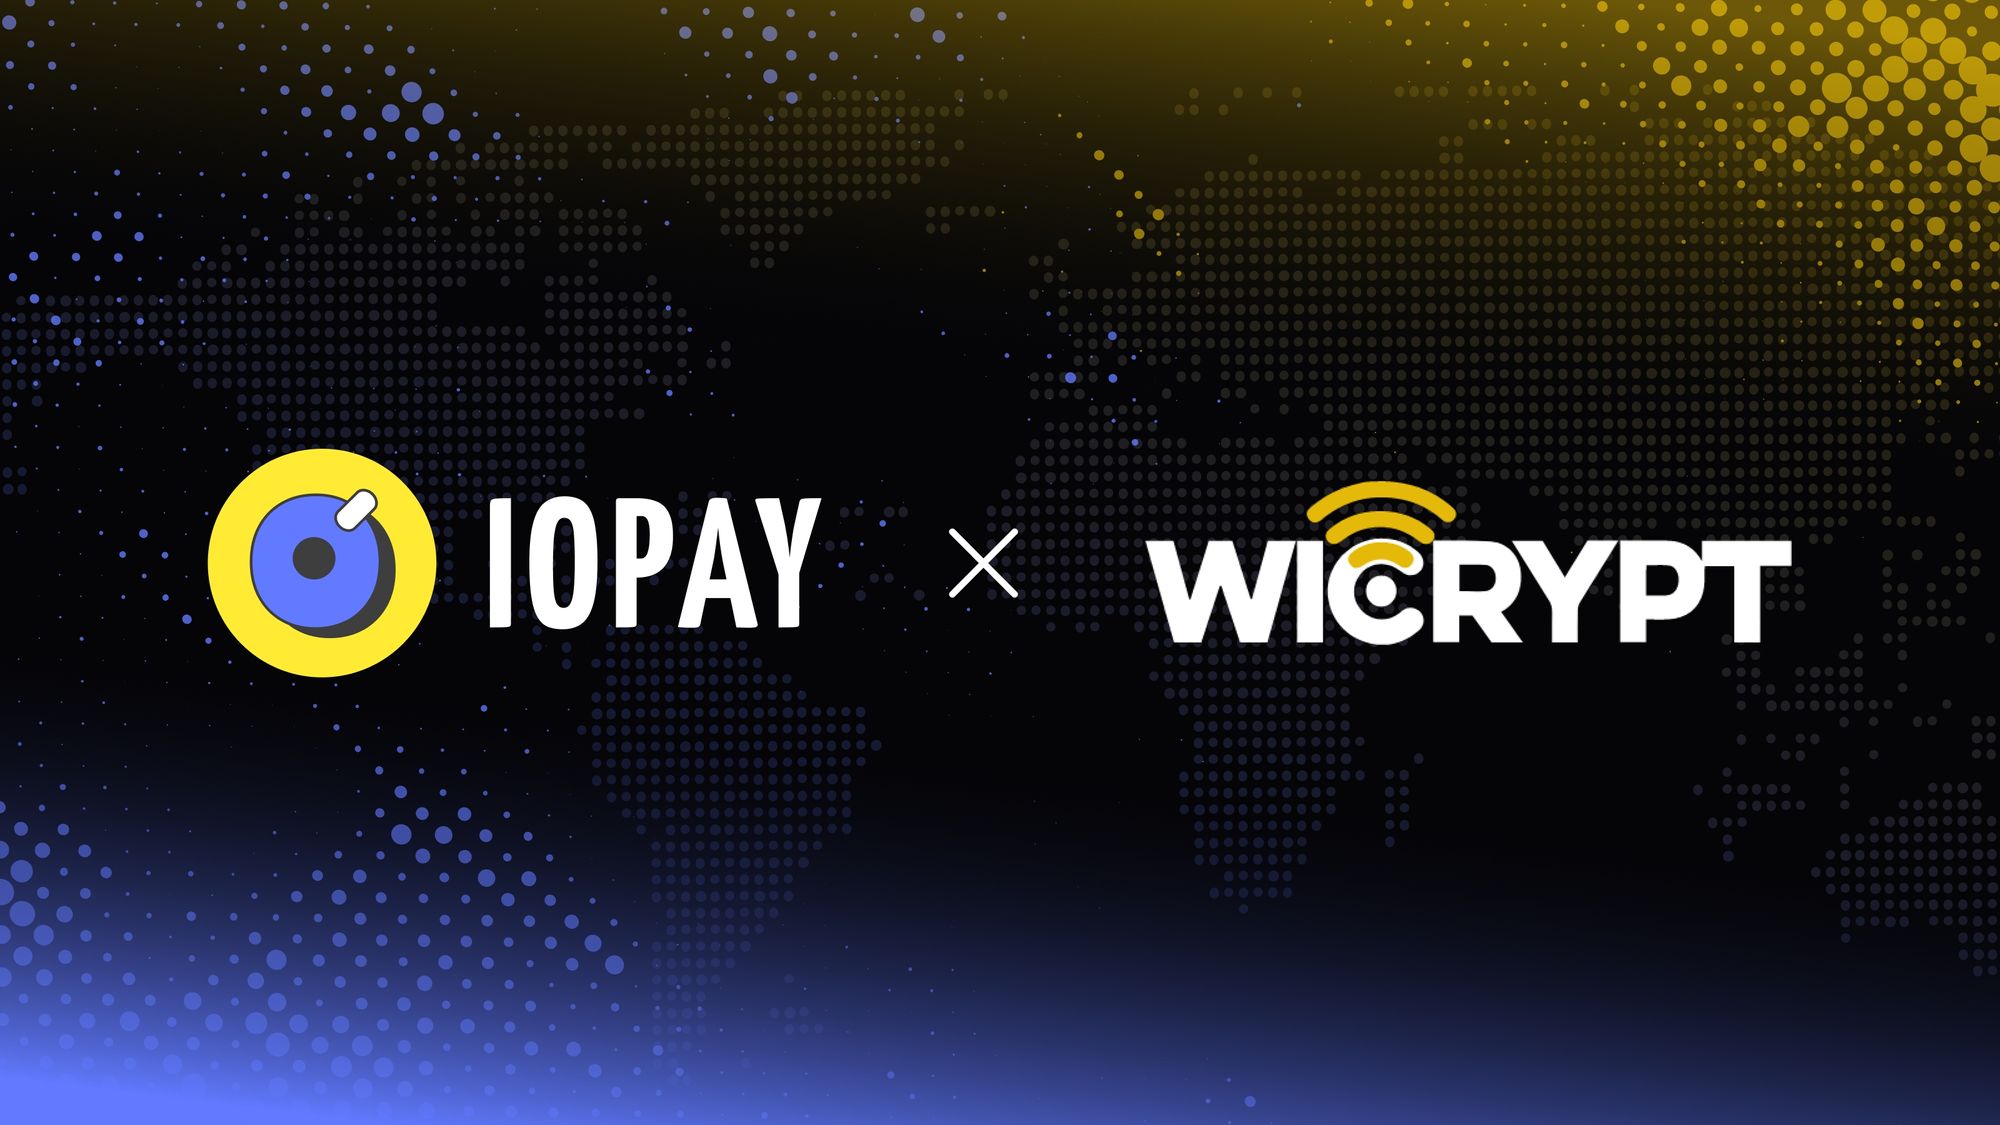 The Go-to DePIN Wallet ioPay Now Supports Wicrypt